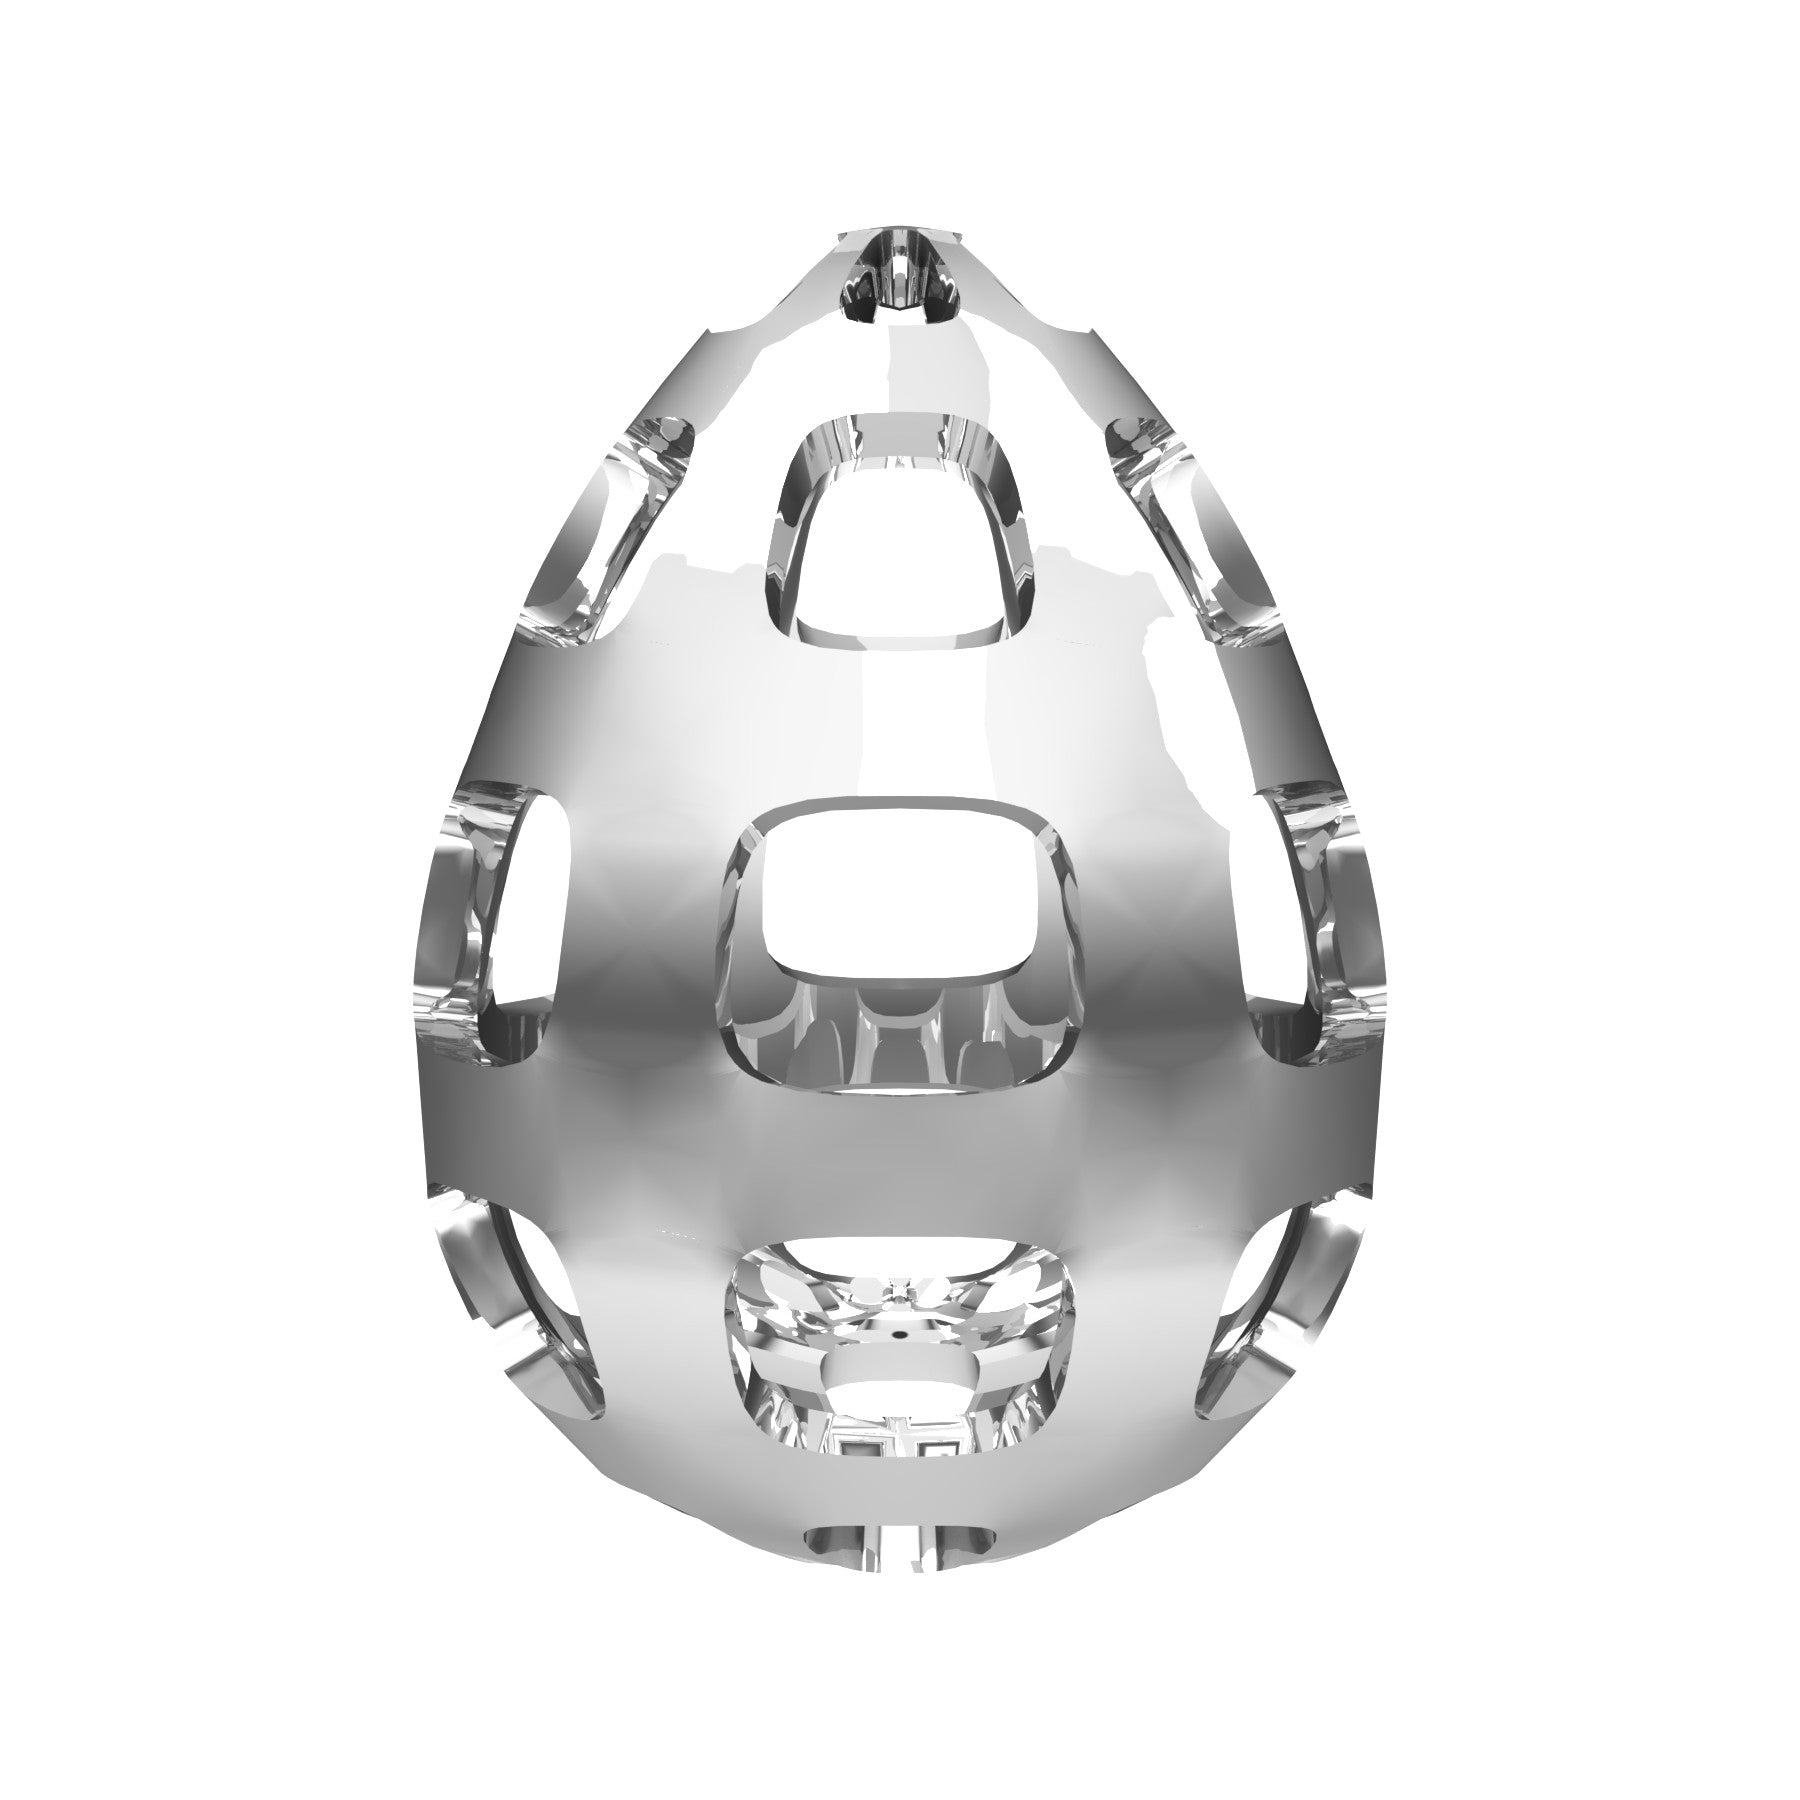 egg bomb pendant, 18 K white gold, weight about 17,9 g (0.63 oz), size 28,5x28,5x29,9 mm